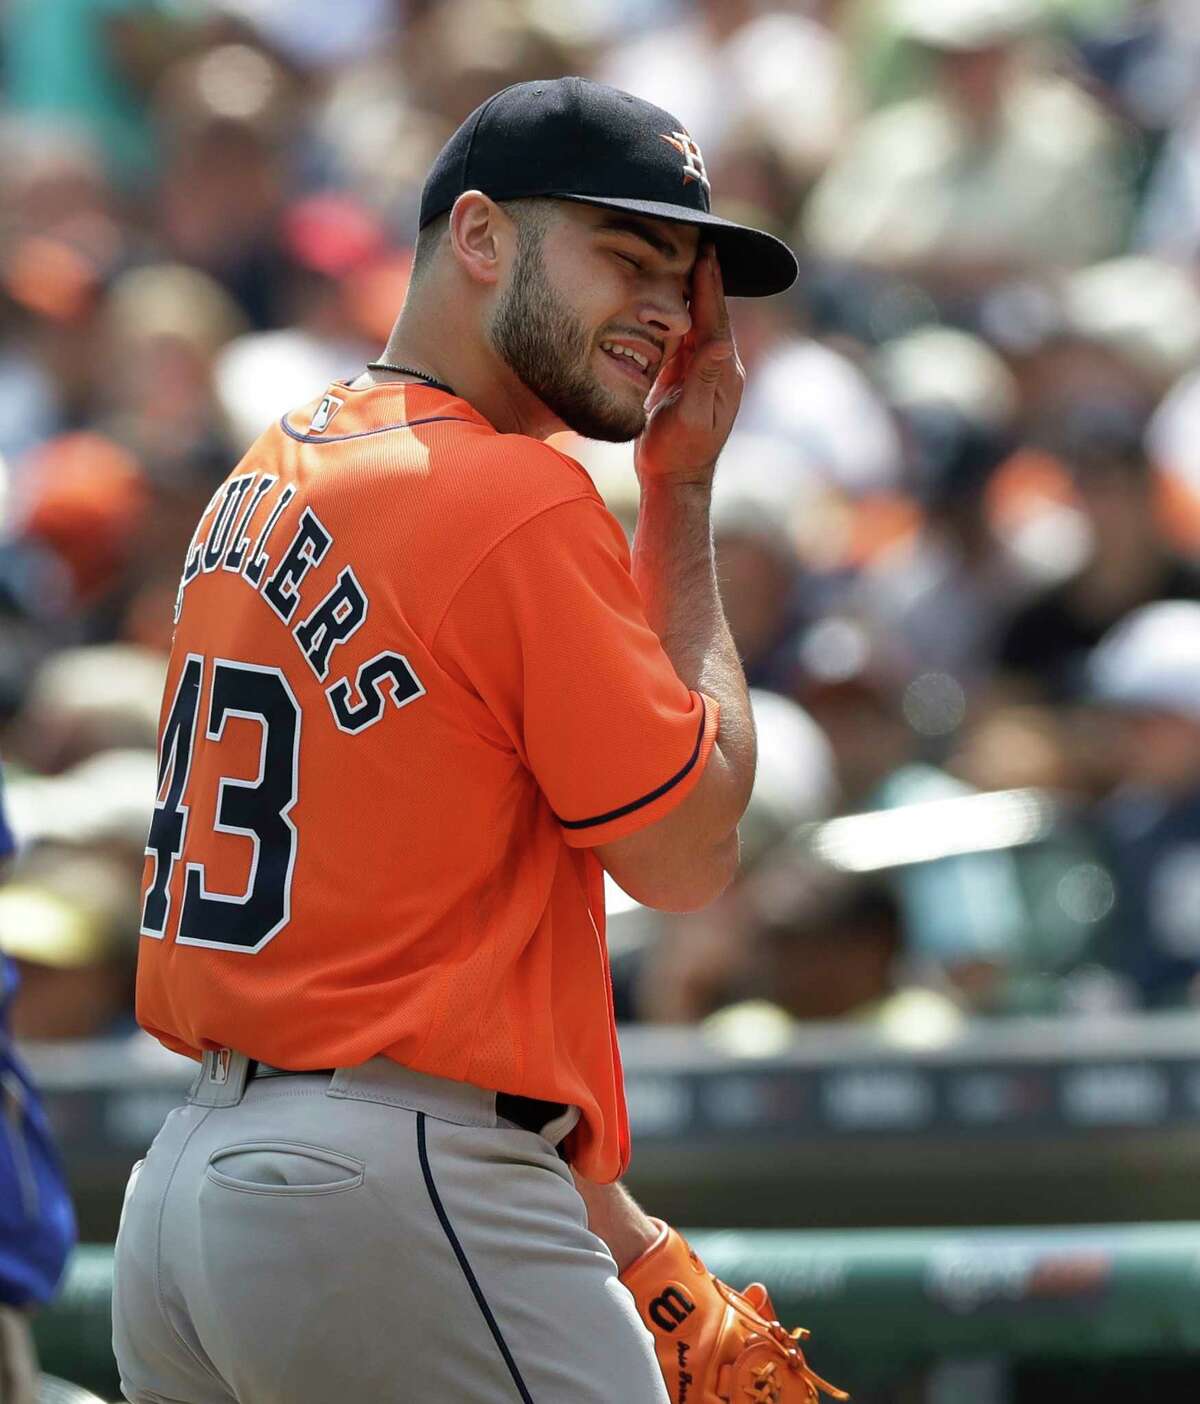 Houston Astros starting pitcher Lance McCullers Jr. wipes his face after being relieved during the sixth inning of a baseball game against the Detroit Tigers, Sunday, July 30, 2017, in Detroit. (AP Photo/Carlos Osorio)